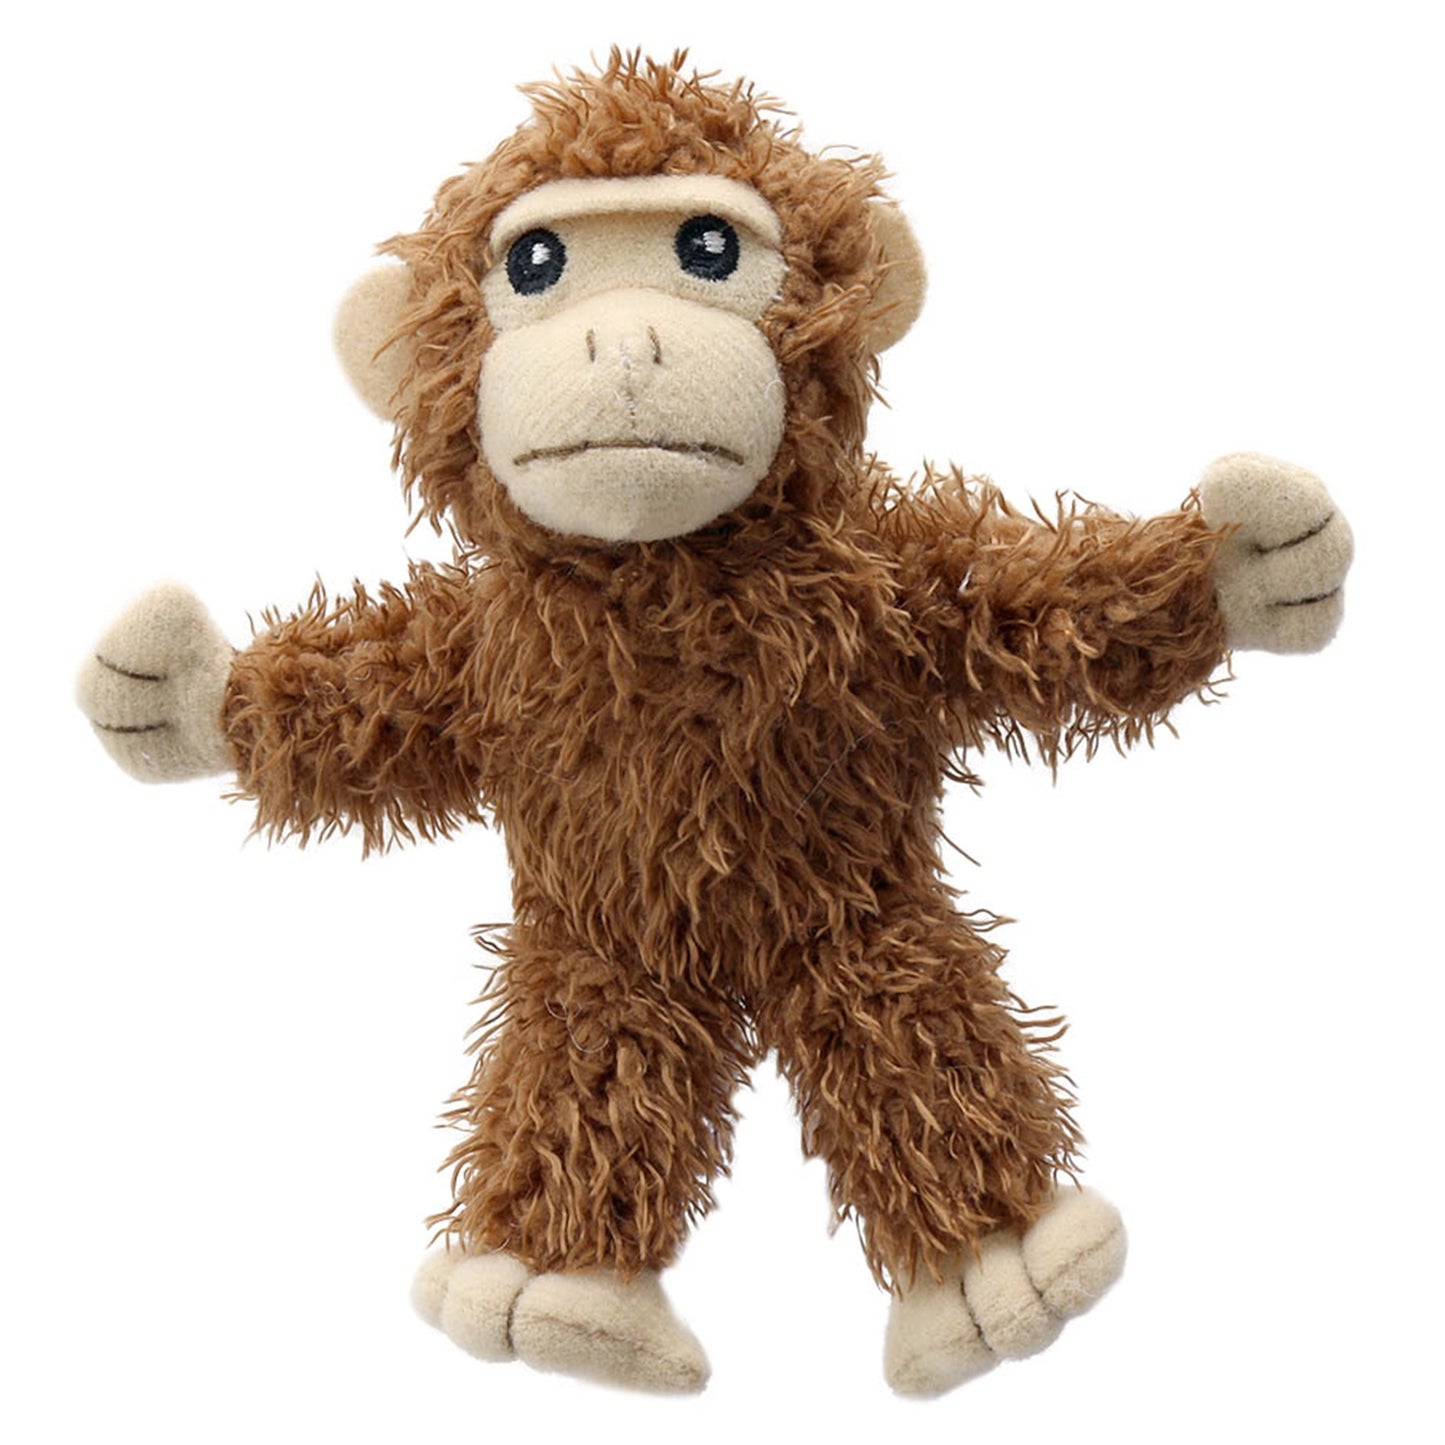 Monkey Finger Puppet - The Puppet Company - The Forgotten Toy Shop